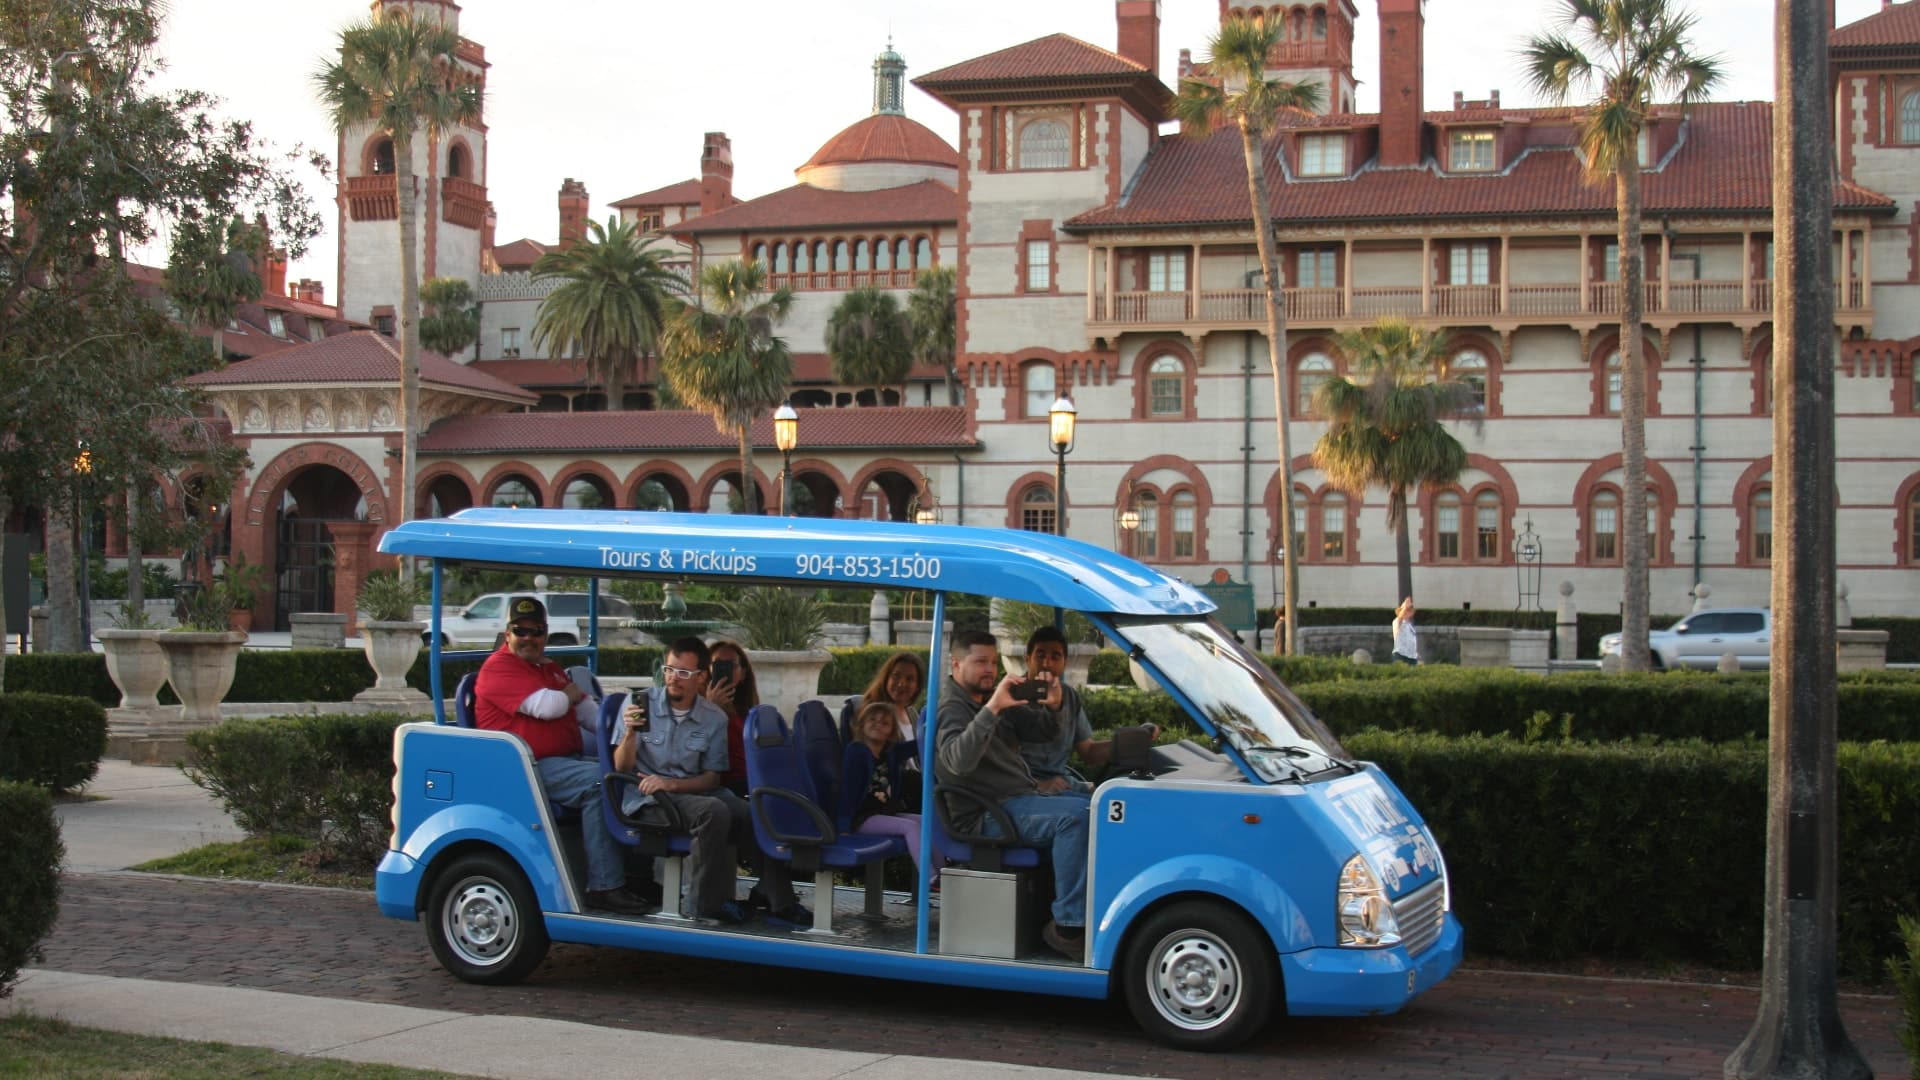 Tourists riding in small blue open shuttle